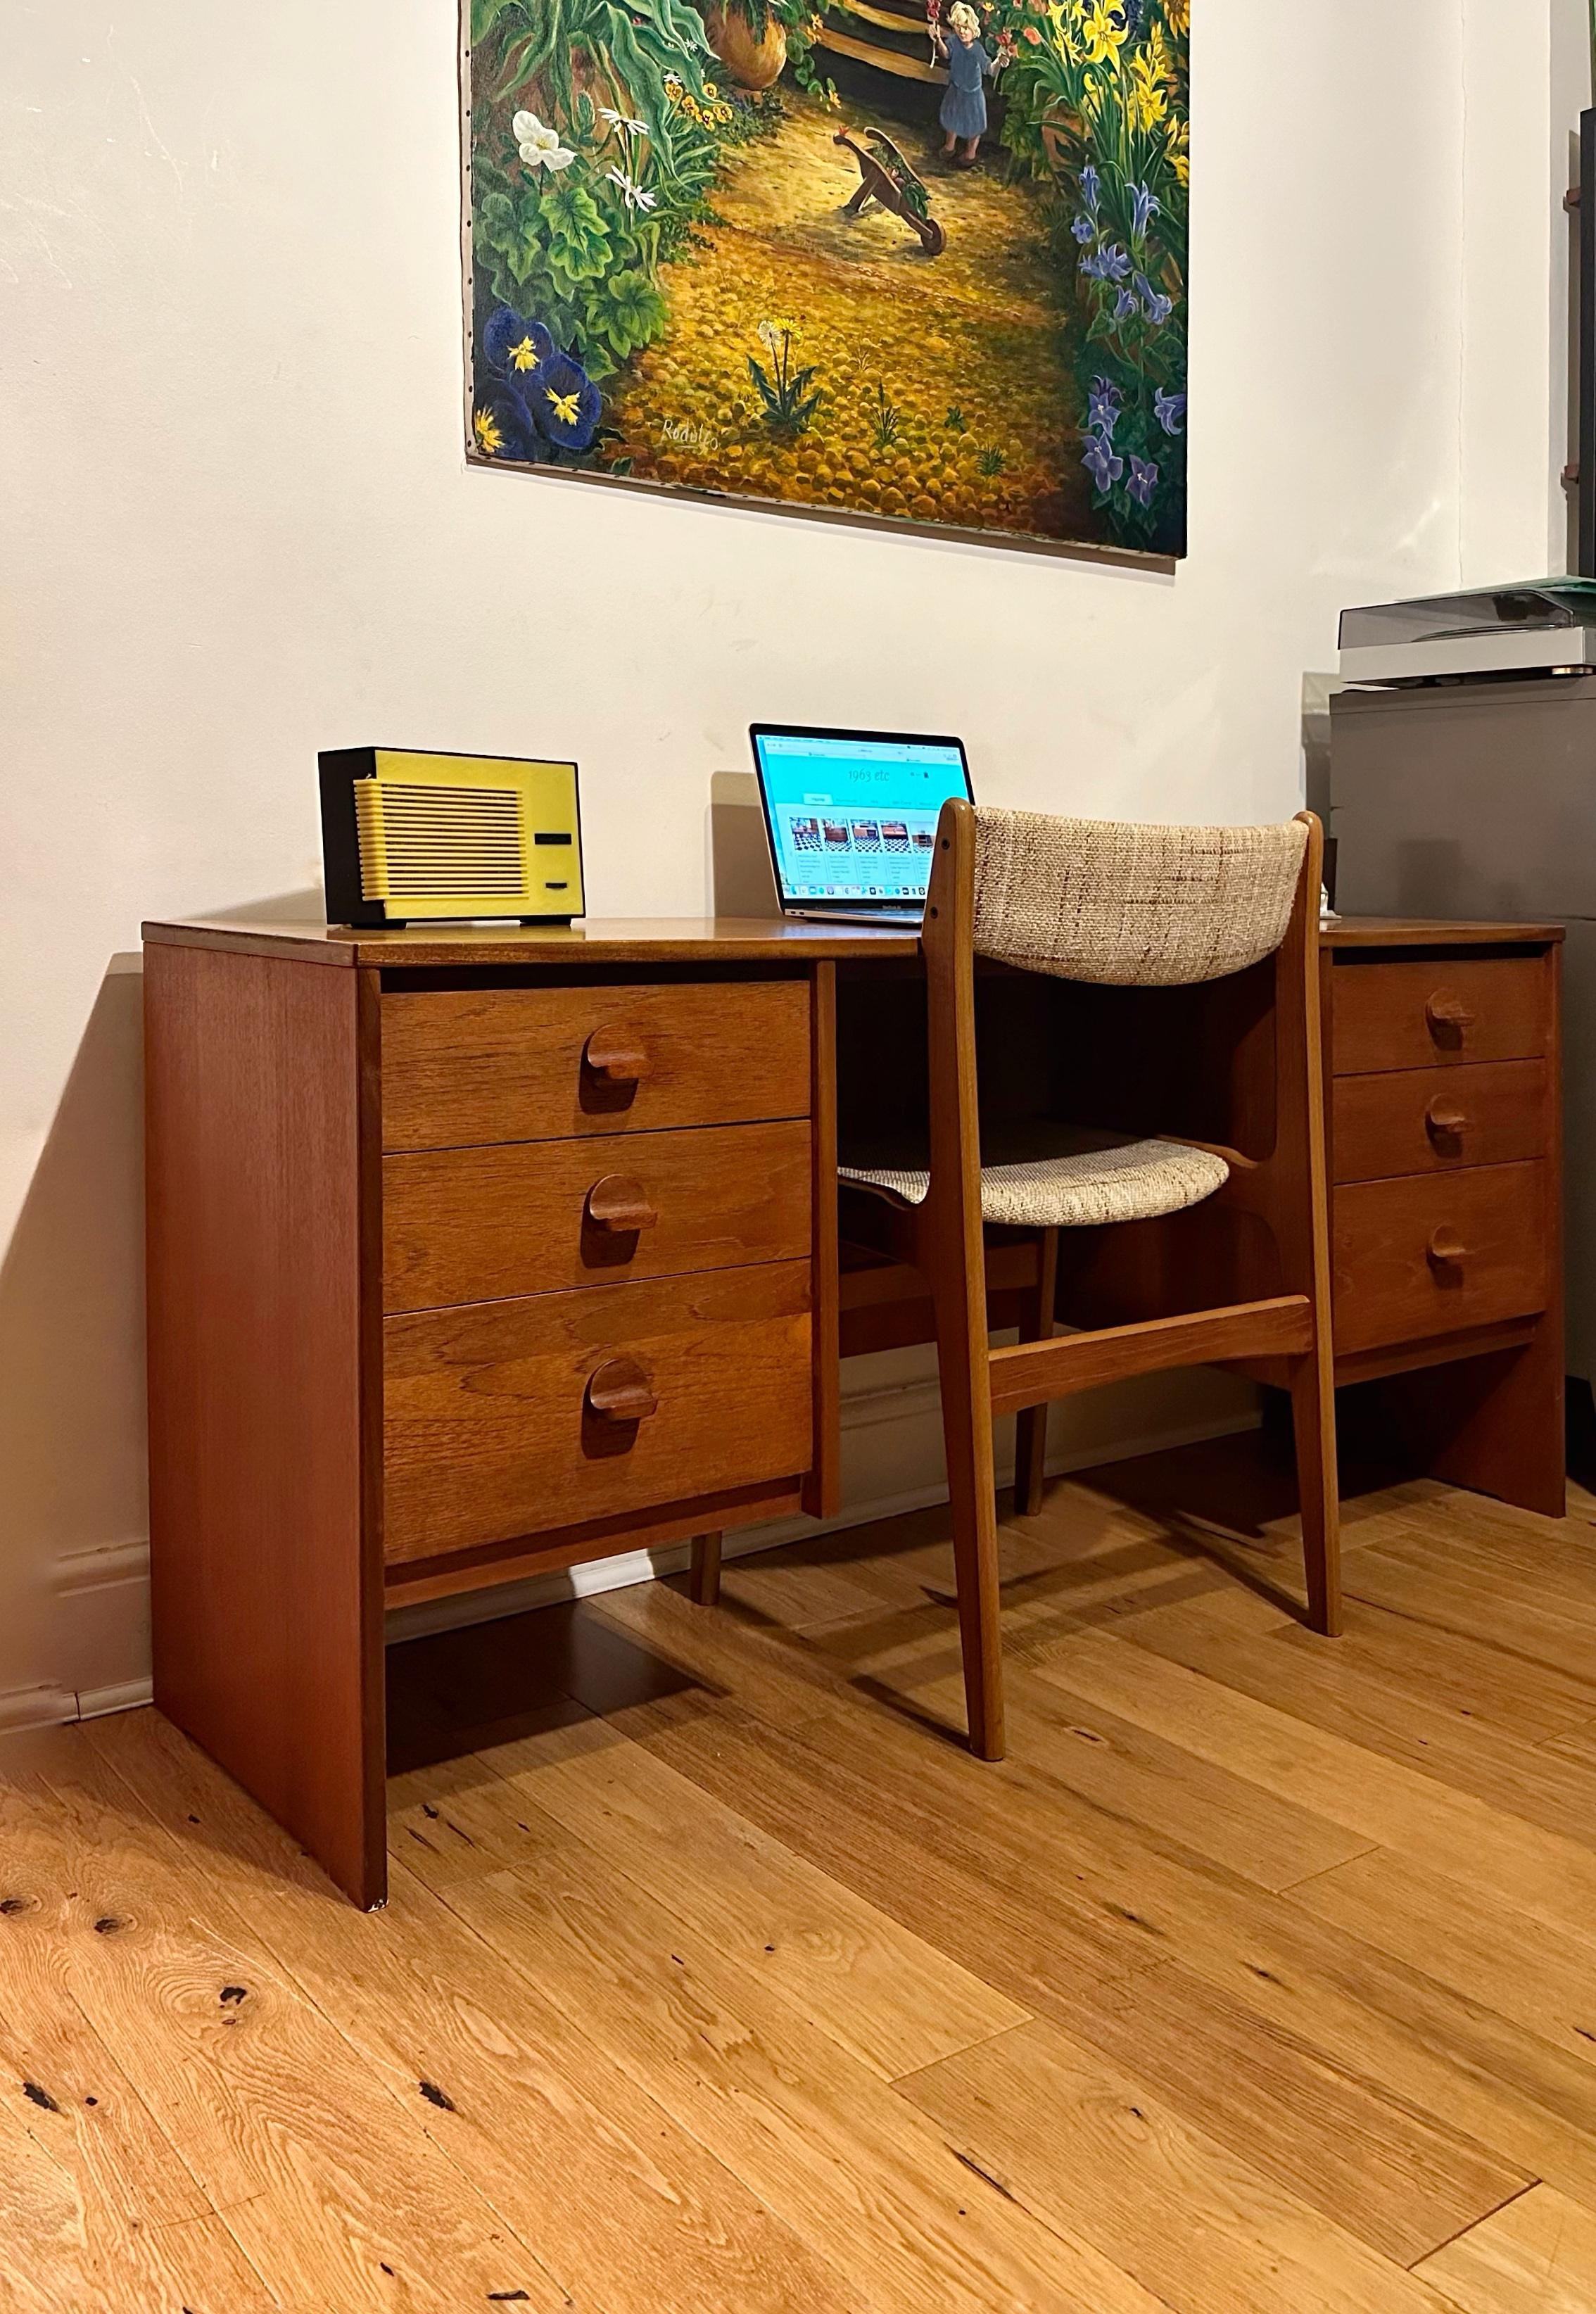 
Stunning Mid-century 1960’s teak desk by Stag. Three spacious drawers on each side with beautifully designed handles. Stunning design with gorgeous teak grain throuhout.
Very good vintage condition with some minor signs of use. 

Dimensions: